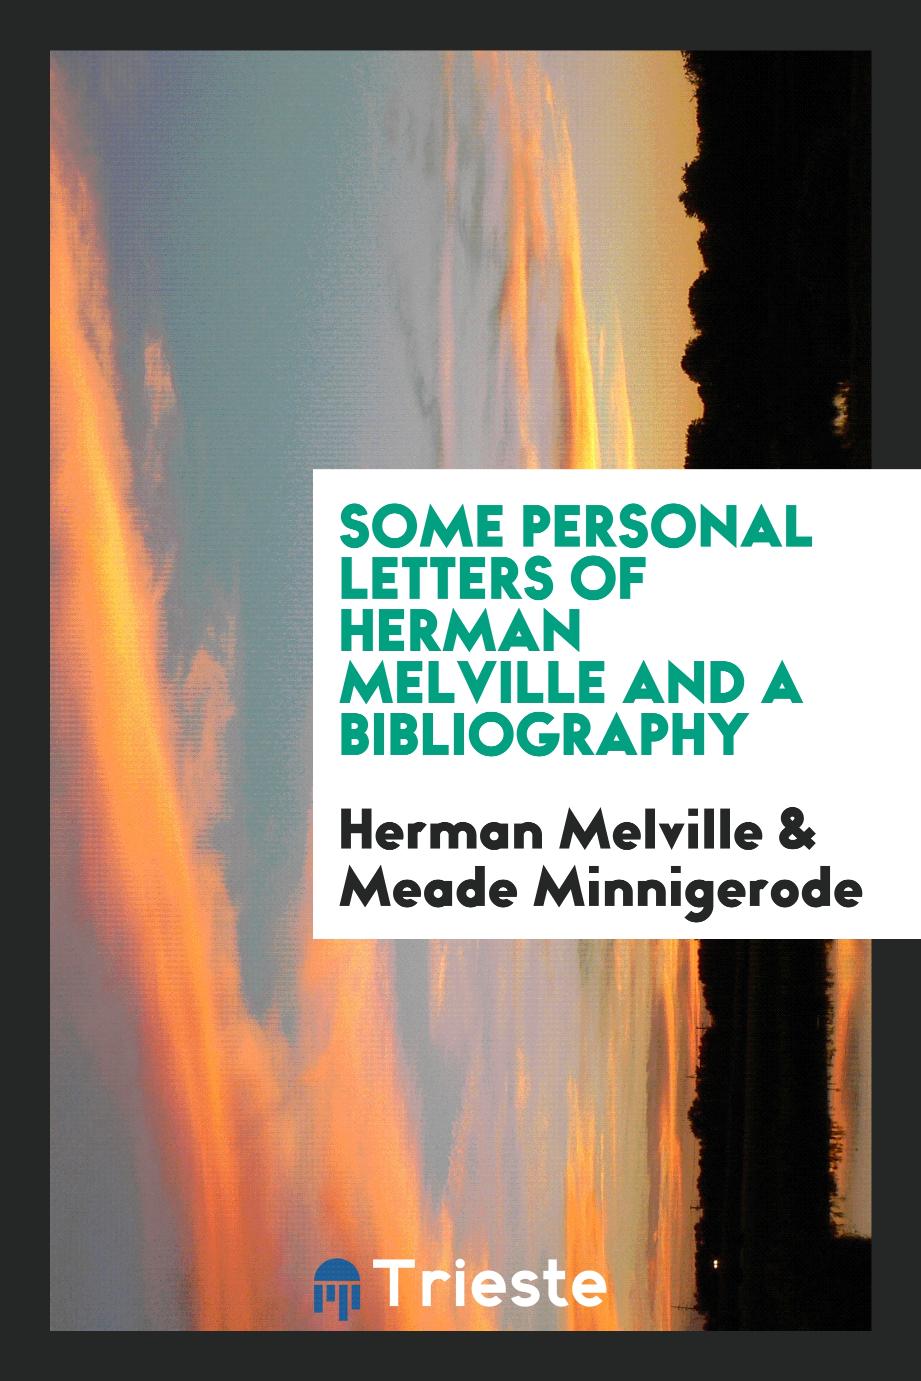 Some personal letters of Herman Melville and a bibliography